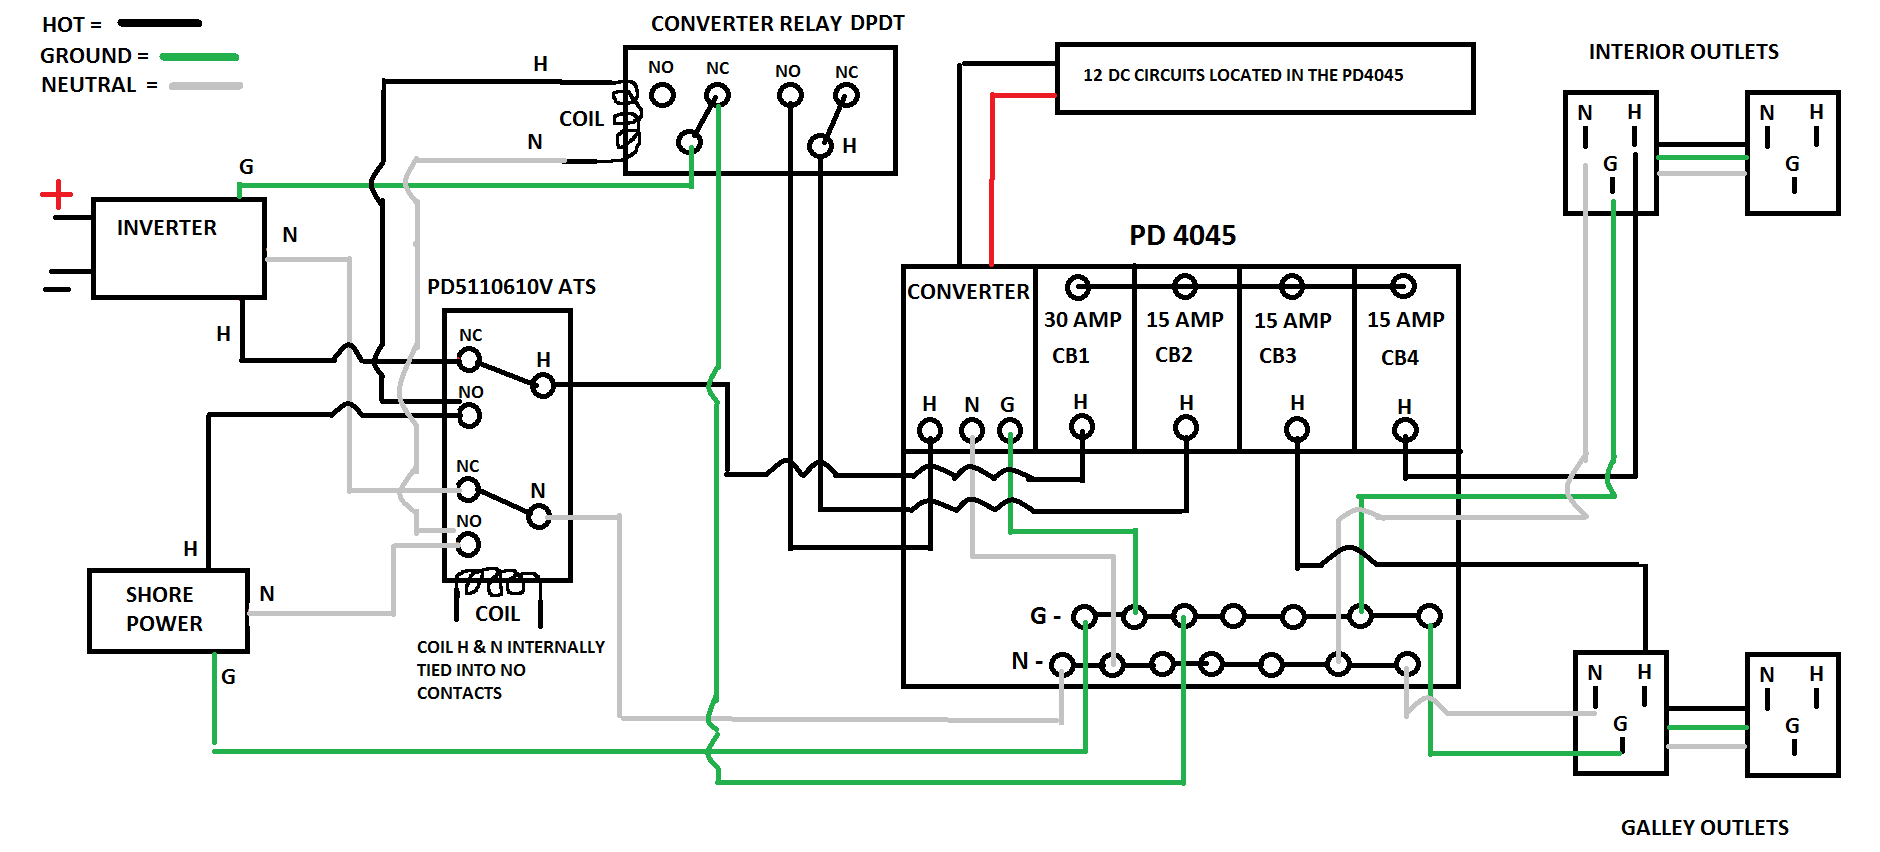 PD 4045 WIRING 1.png